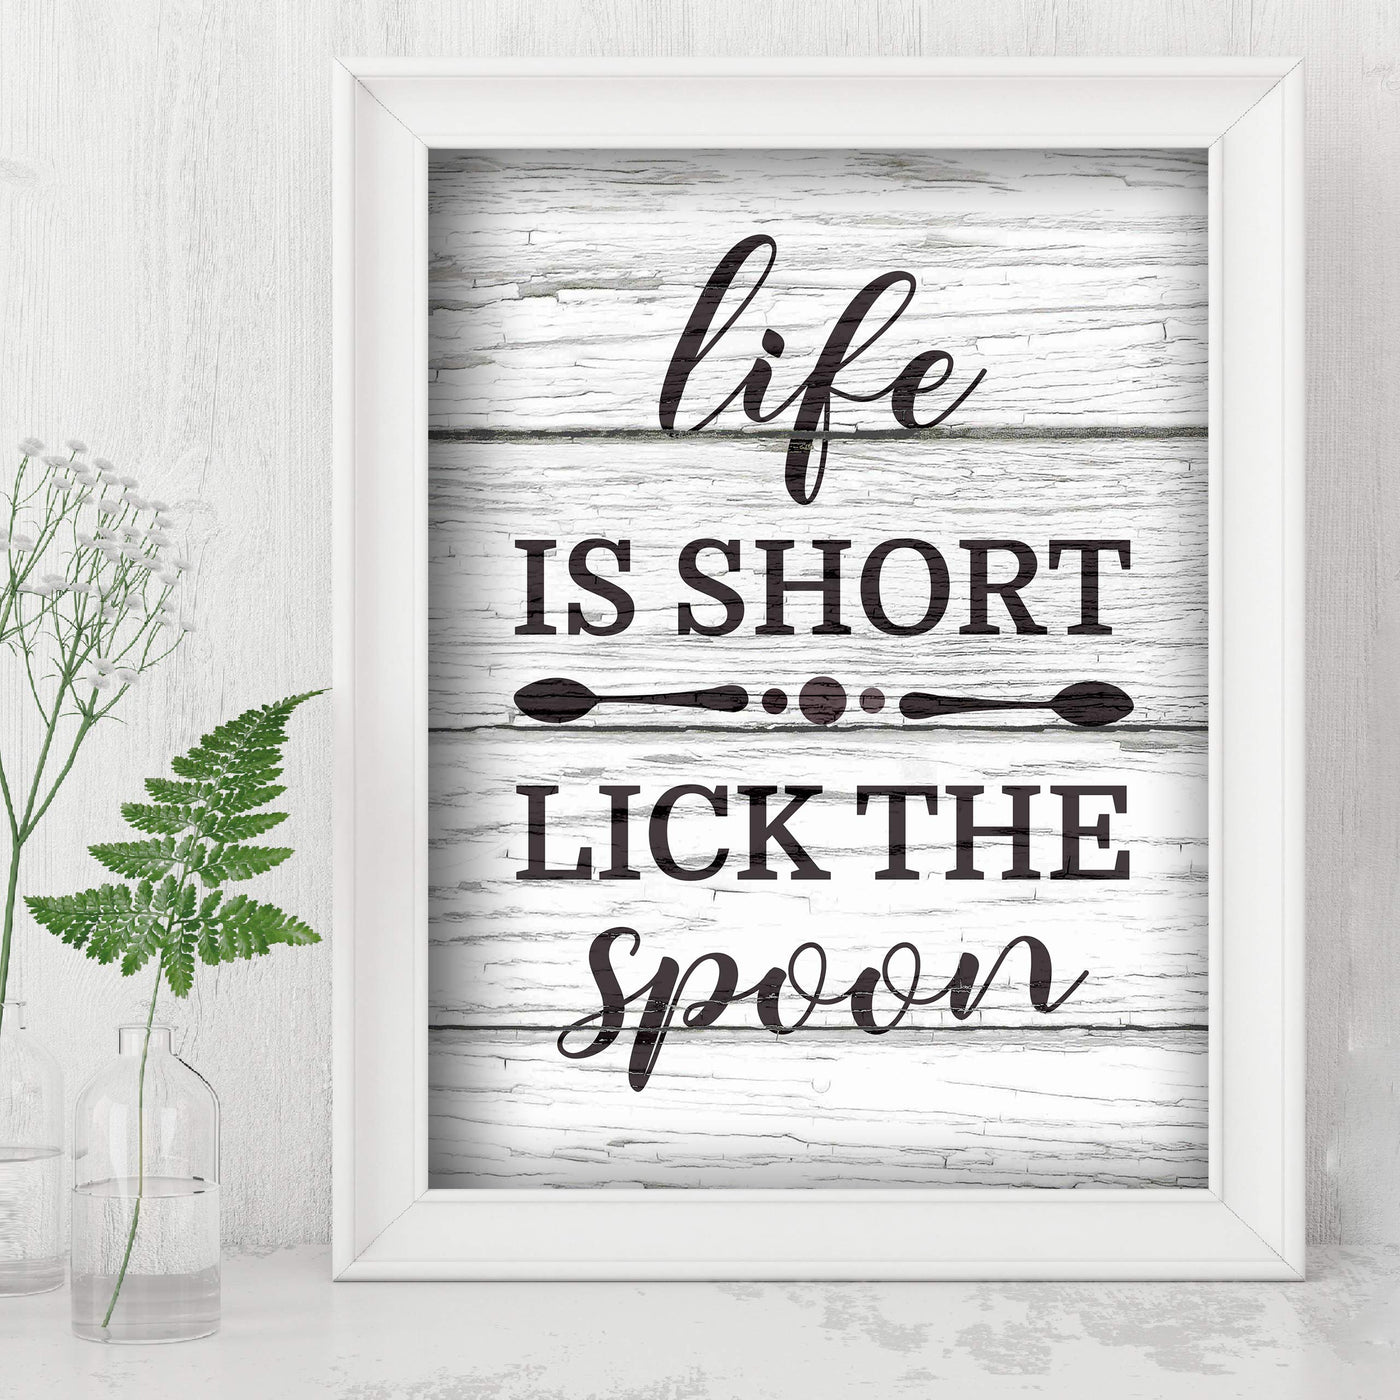 Life Is Short-Lick the Spoon Funny Kitchen Wall Art Sign -8x10" Inspirational Poster Print w/Distressed Wood Design-Ready to Frame. Rustic Home-Farmhouse-Dining Decor. Great Gift! Printed on Paper.